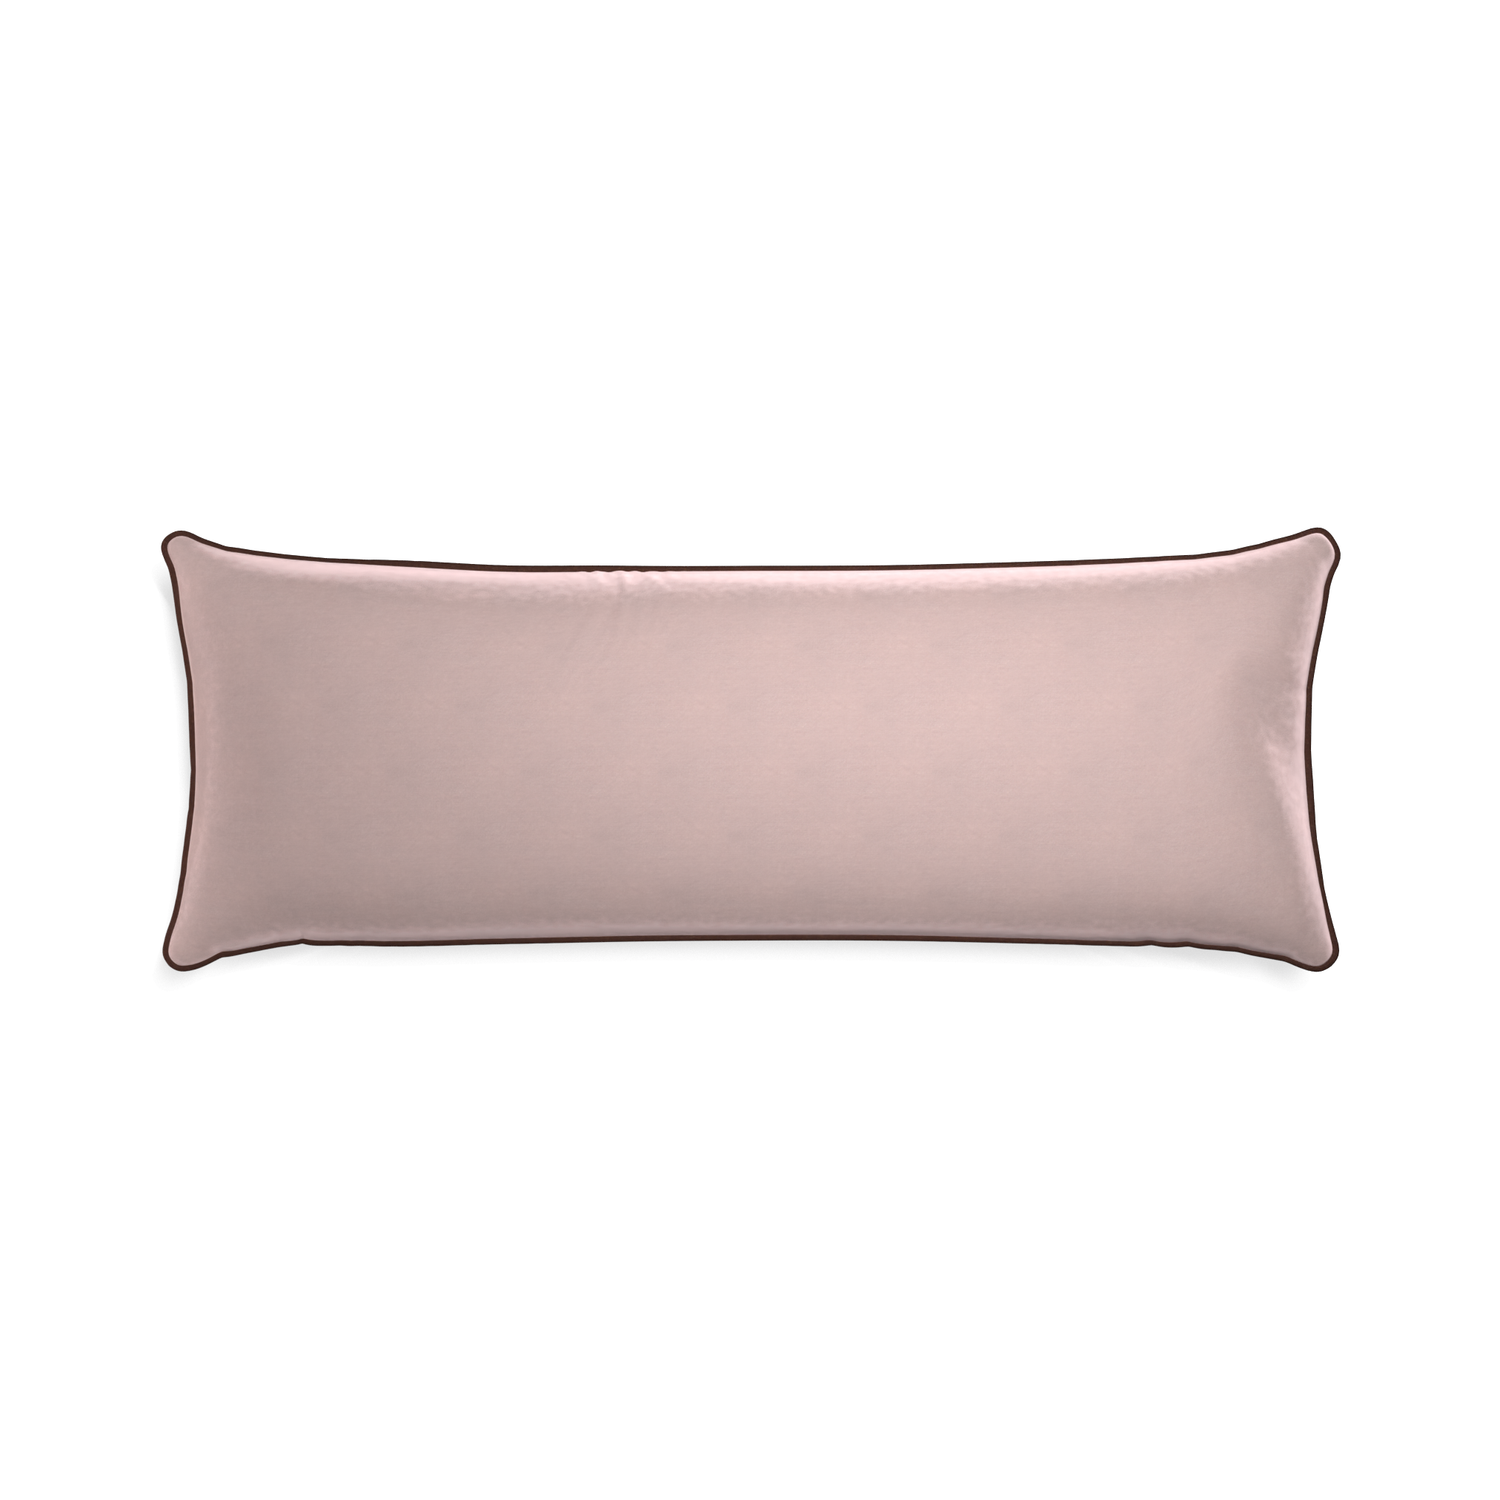 rectangle light pink velvet pillow with brown piping